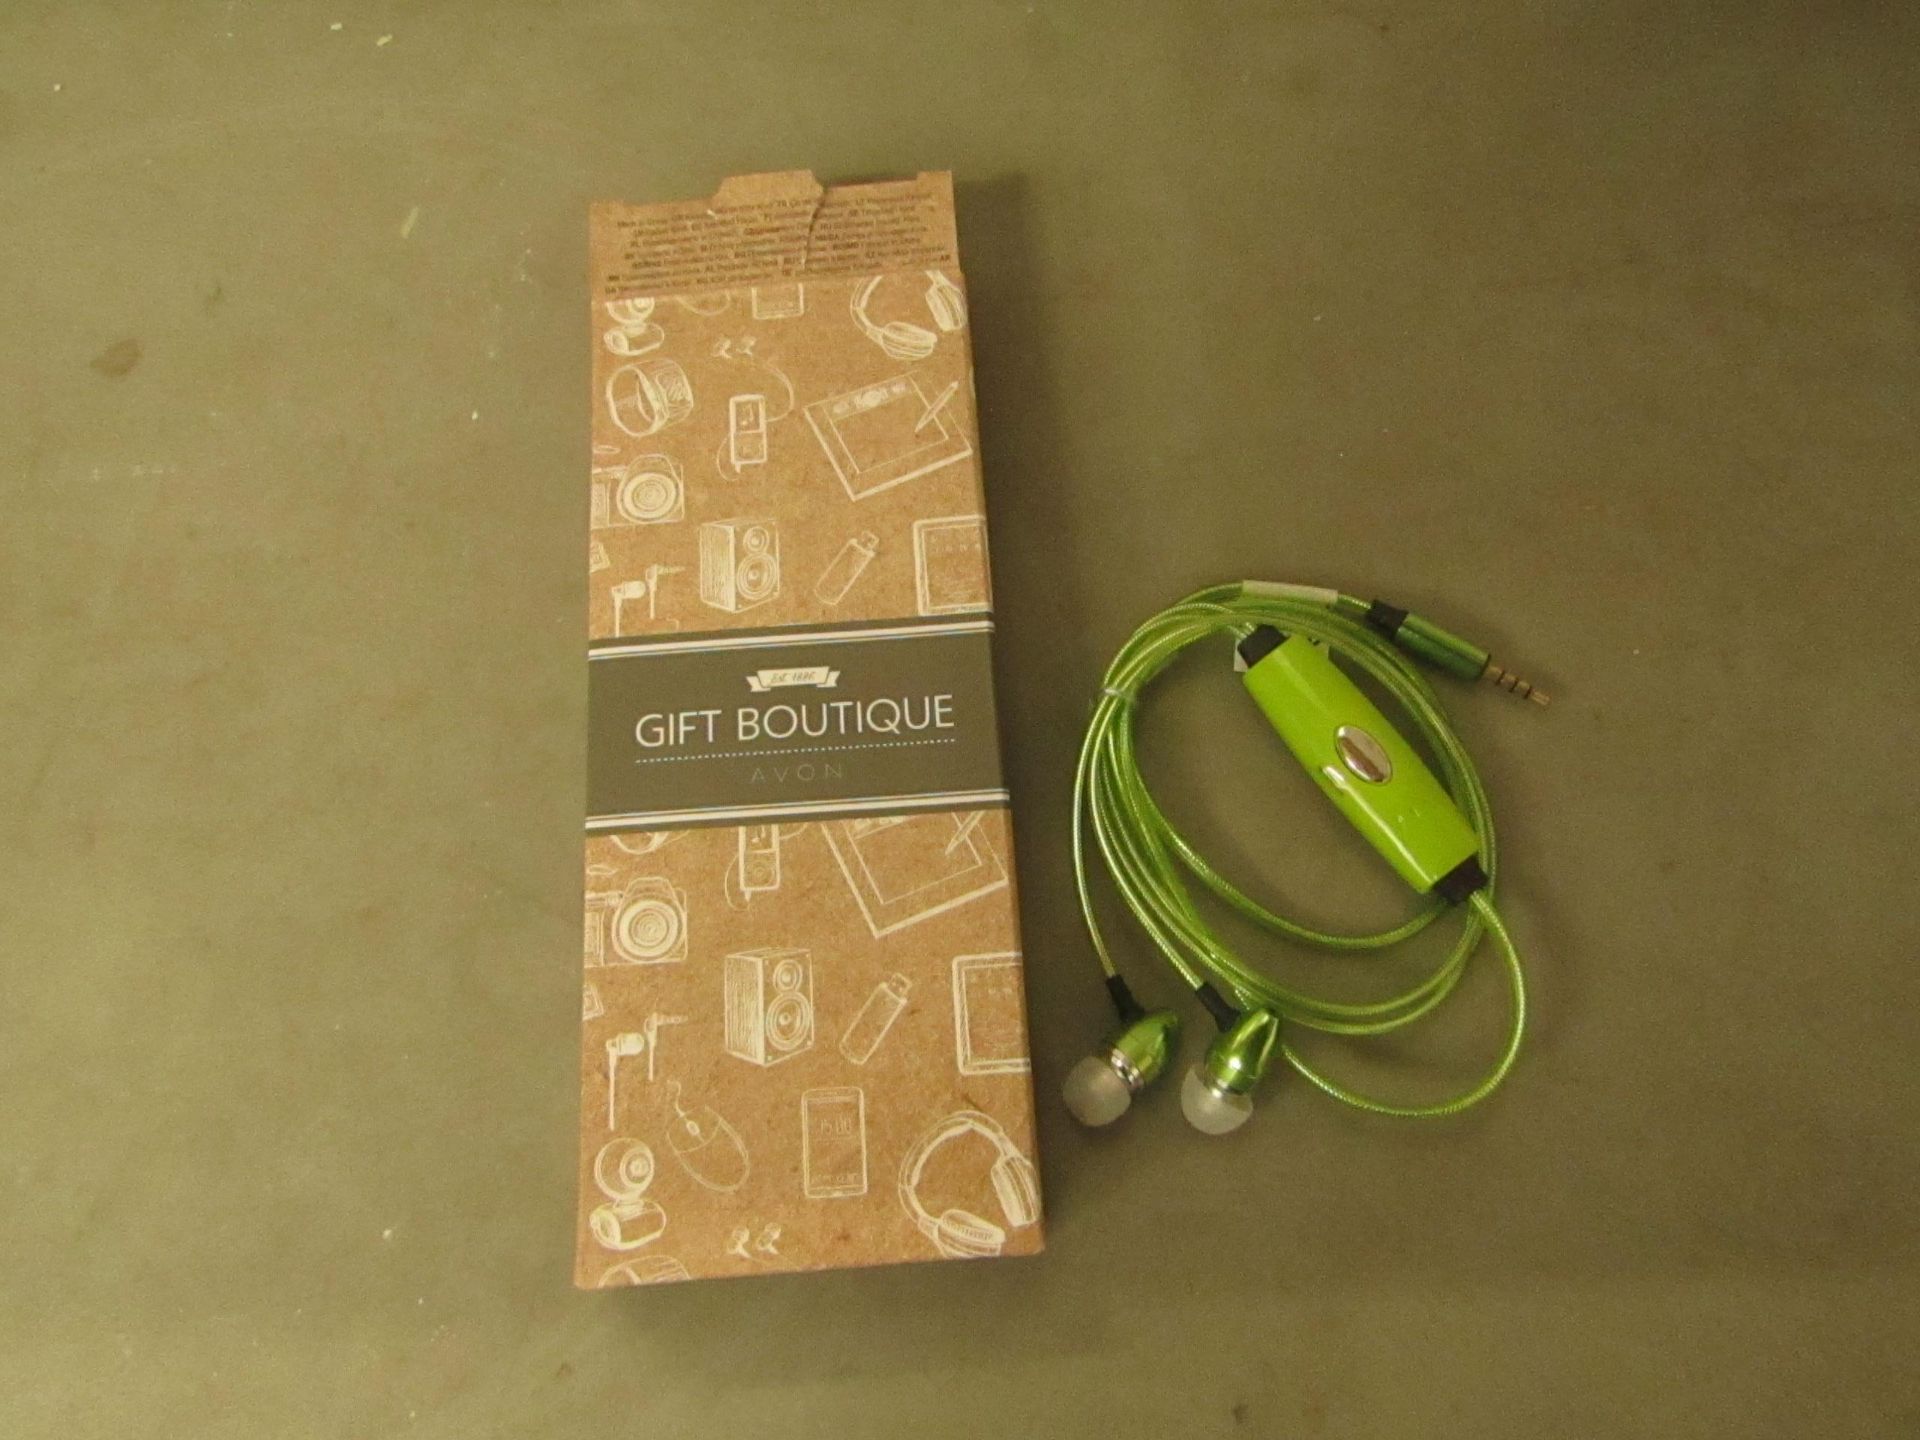 5x Avon - Gift Bouique - Green LED EarBuds - New & Boxed. RRP £15 Each.